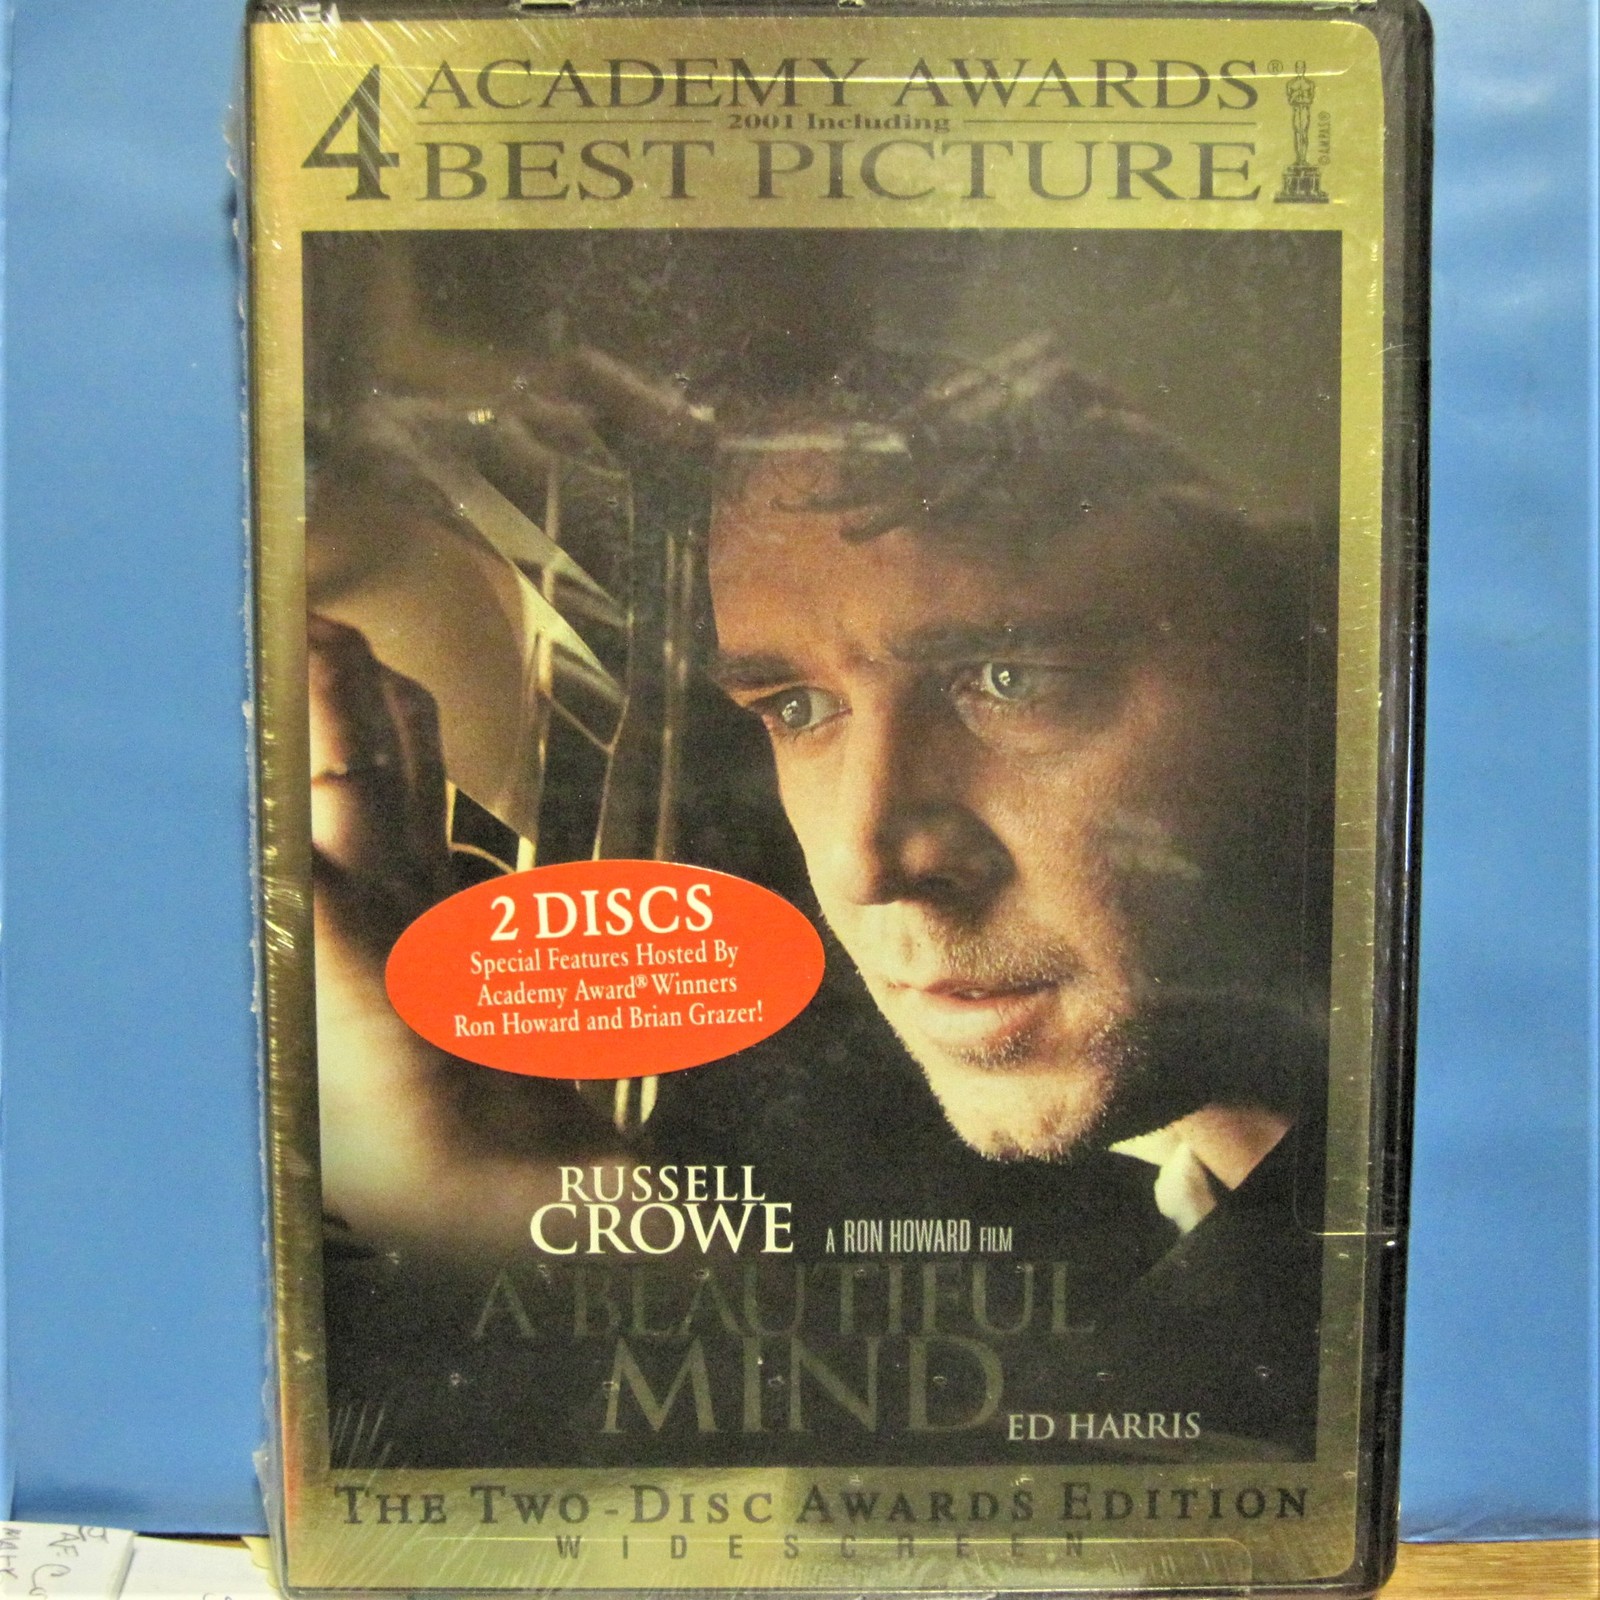 Primary image for DVD A Beautiful Mind Russell 2 Discs Awards Edition Widescreen Crowe Ed Harris